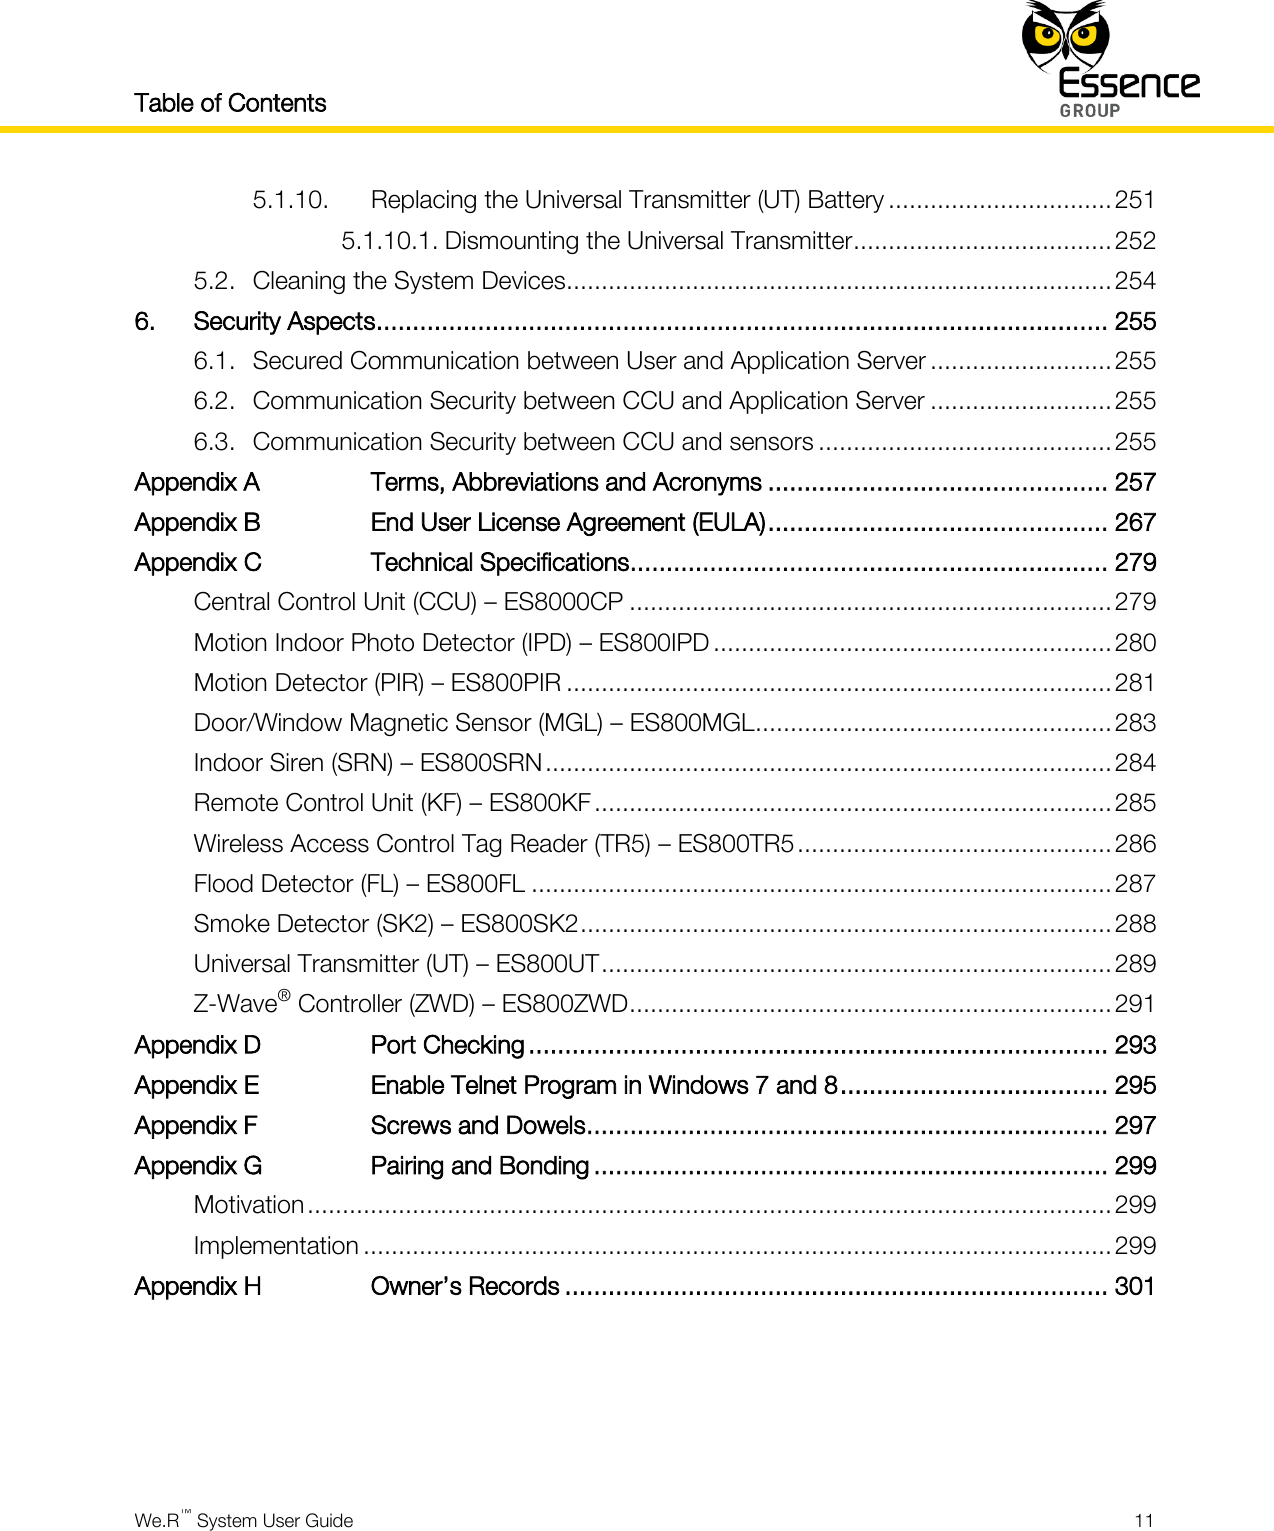 Table of Contents    We.R™ System User Guide  11  5.1.10. Replacing the Universal Transmitter (UT) Battery ................................ 251 5.1.10.1. Dismounting the Universal Transmitter ..................................... 252 5.2. Cleaning the System Devices.............................................................................. 254 6. Security Aspects ..................................................................................................... 255 6.1. Secured Communication between User and Application Server .......................... 255 6.2. Communication Security between CCU and Application Server .......................... 255 6.3. Communication Security between CCU and sensors .......................................... 255 Appendix A Terms, Abbreviations and Acronyms ............................................... 257 Appendix B End User License Agreement (EULA) ............................................... 267 Appendix C Technical Specifications .................................................................. 279 Central Control Unit (CCU) – ES8000CP ..................................................................... 279 Motion Indoor Photo Detector (IPD) – ES800IPD ......................................................... 280 Motion Detector (PIR) – ES800PIR .............................................................................. 281 Door/Window Magnetic Sensor (MGL) – ES800MGL ................................................... 283 Indoor Siren (SRN) – ES800SRN ................................................................................. 284 Remote Control Unit (KF) – ES800KF .......................................................................... 285 Wireless Access Control Tag Reader (TR5) – ES800TR5 ............................................. 286 Flood Detector (FL) – ES800FL ................................................................................... 287 Smoke Detector (SK2) – ES800SK2 ............................................................................ 288 Universal Transmitter (UT) – ES800UT ......................................................................... 289 Z-Wave® Controller (ZWD) – ES800ZWD ..................................................................... 291 Appendix D Port Checking ................................................................................ 293 Appendix E Enable Telnet Program in Windows 7 and 8 ..................................... 295 Appendix F Screws and Dowels ........................................................................ 297 Appendix G Pairing and Bonding ....................................................................... 299 Motivation ................................................................................................................... 299 Implementation ........................................................................................................... 299 Appendix H Owner’s Records ........................................................................... 301      